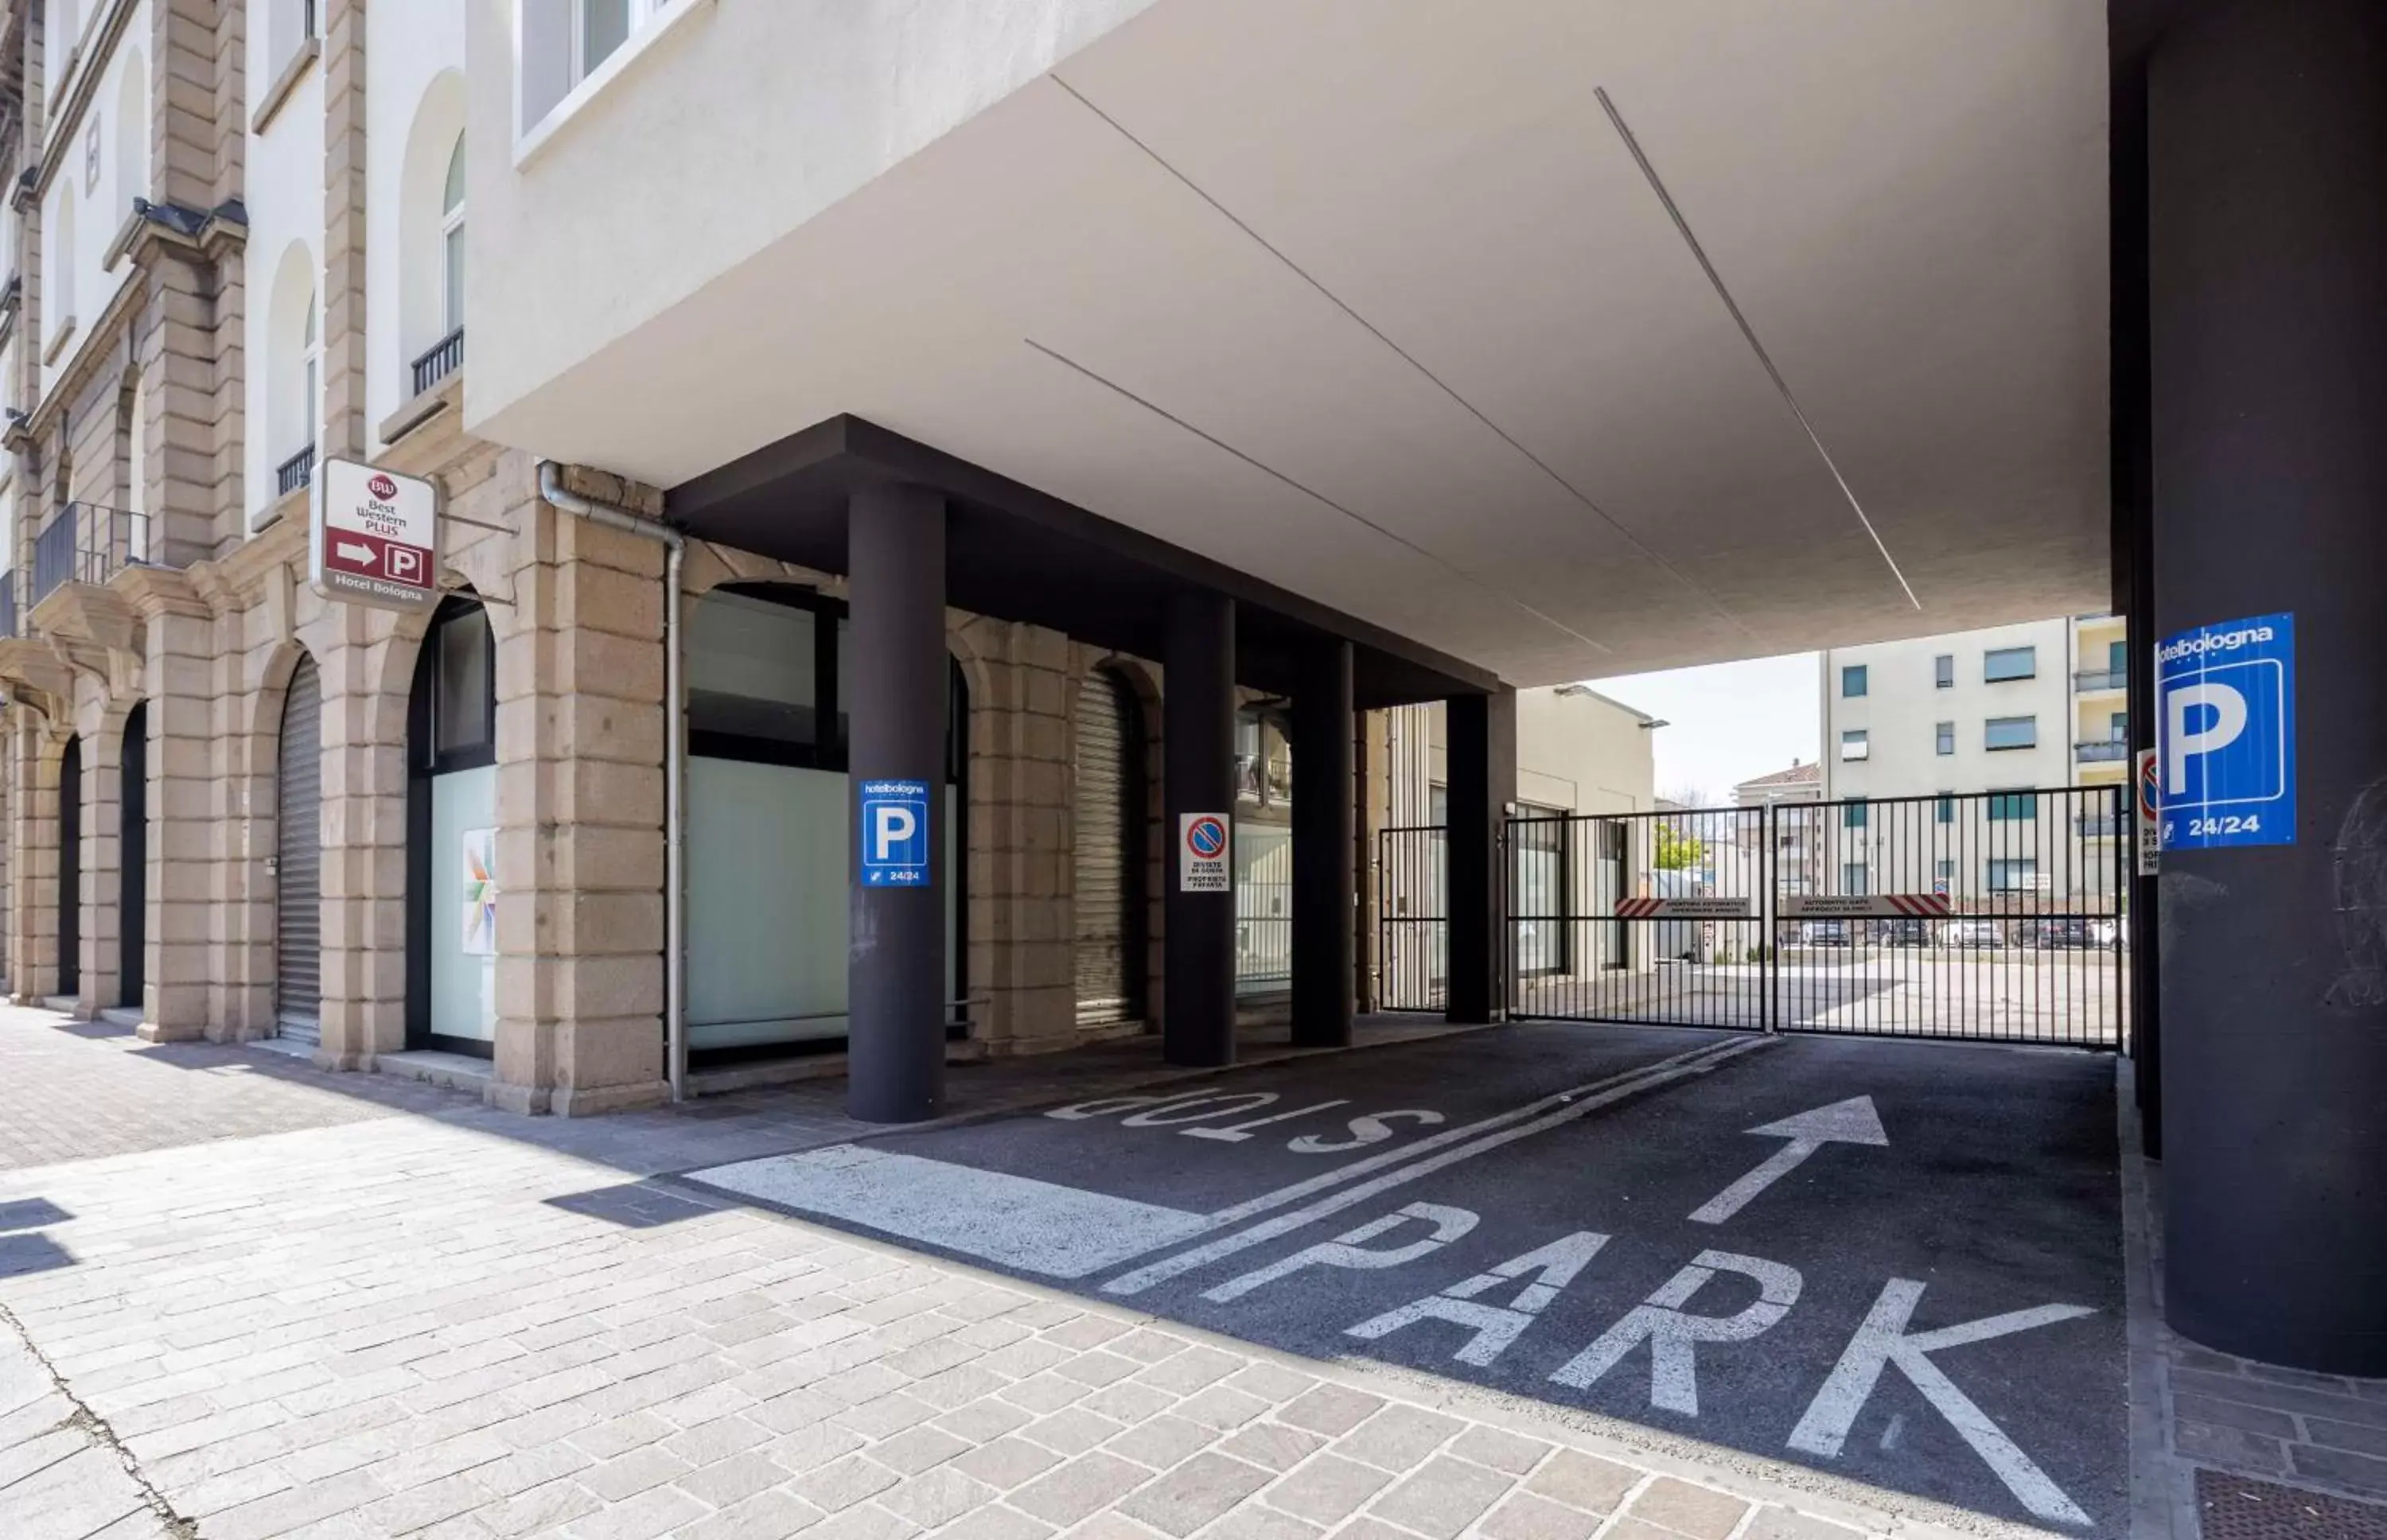 Property building in Best Western Plus Hotel Bologna